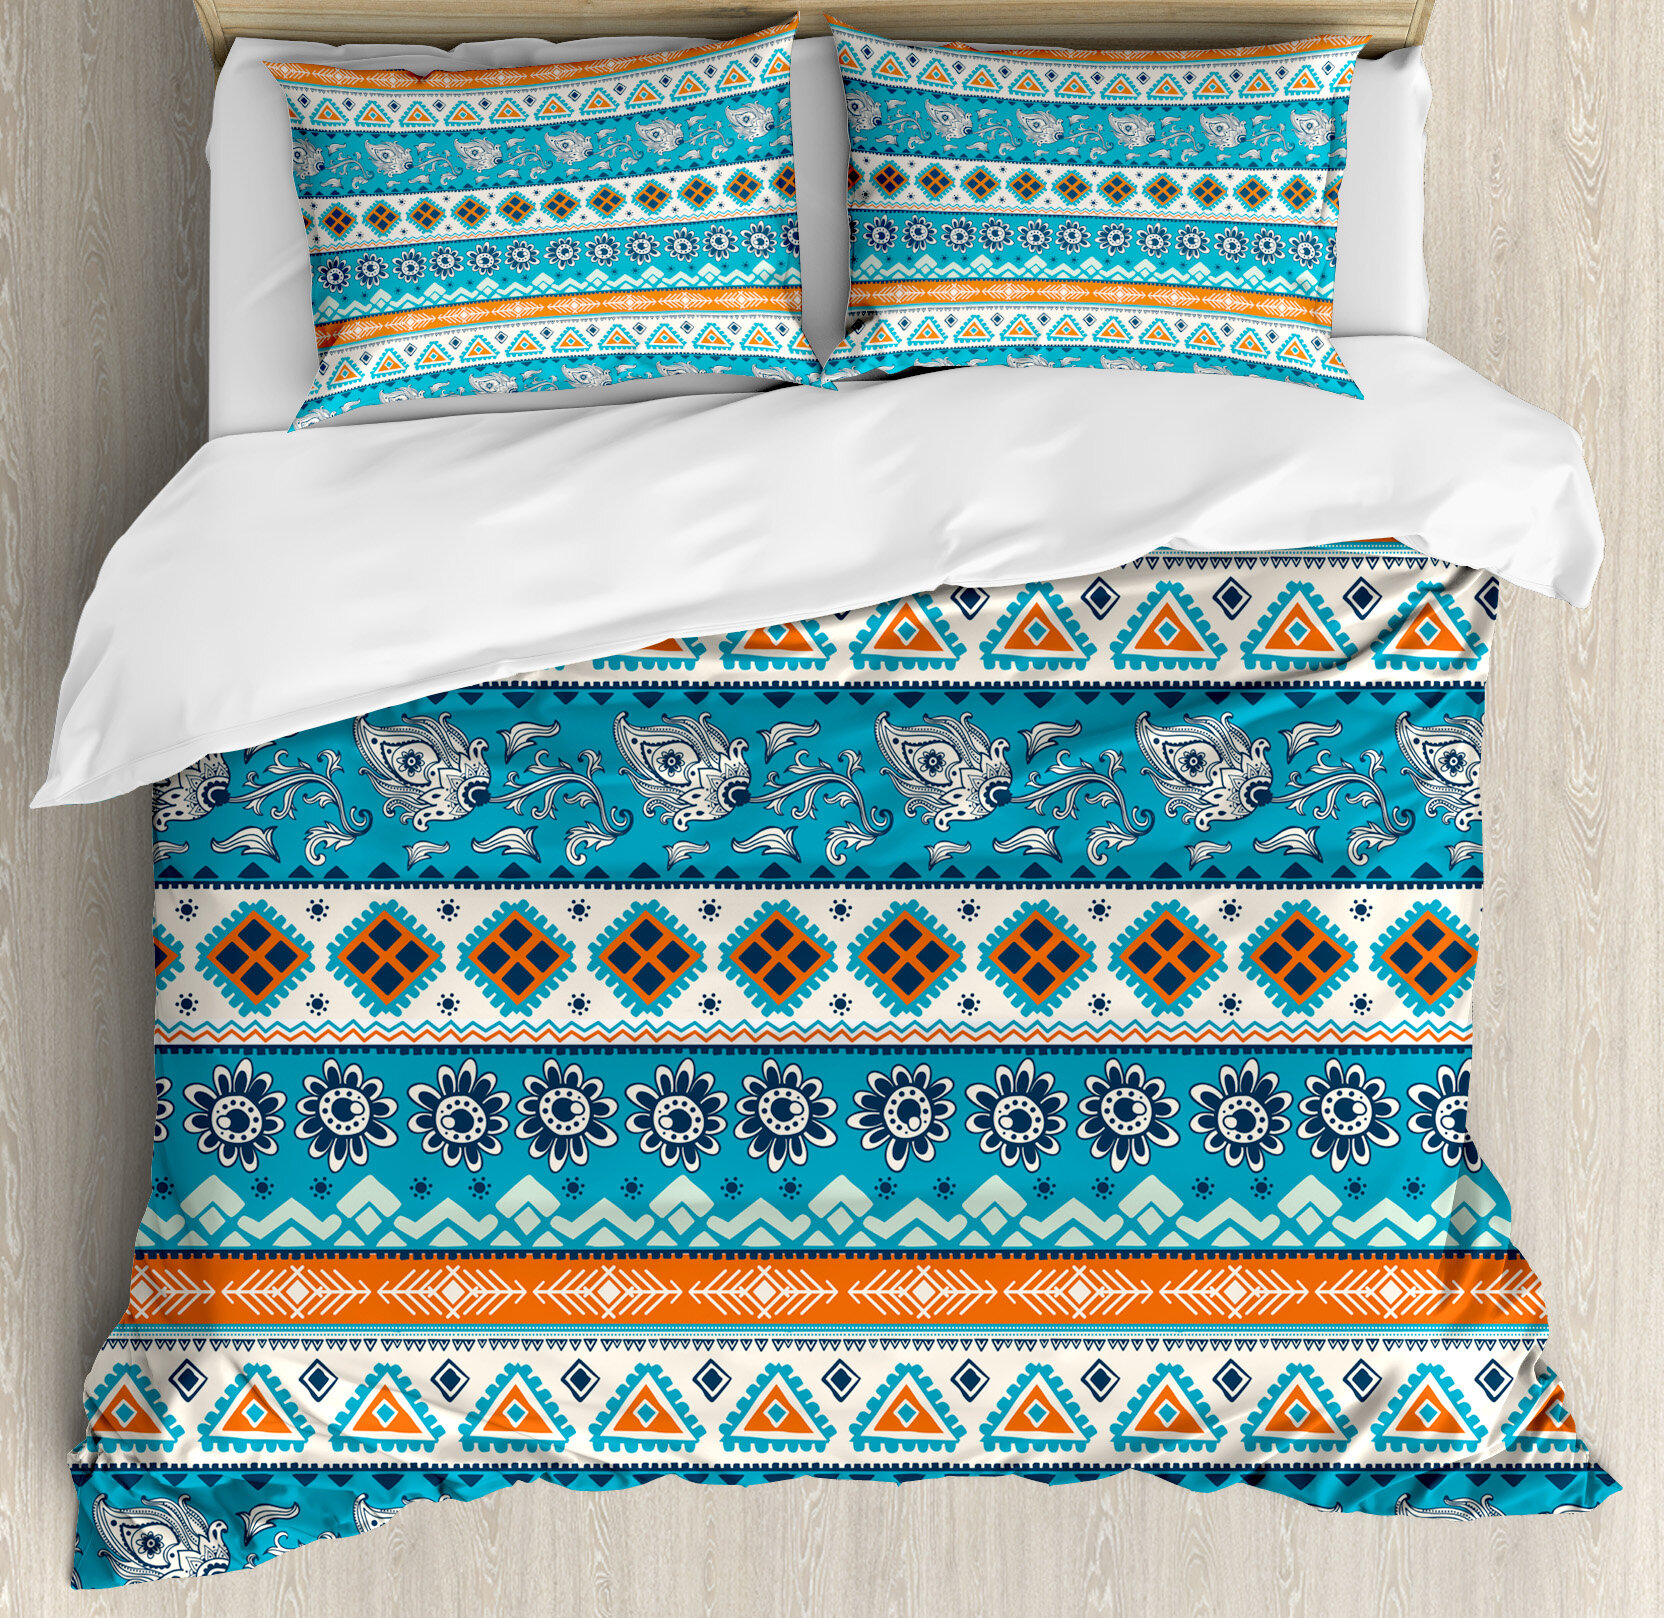 East Urban Home Tribal Aztec Indian Print With Persian Tulips